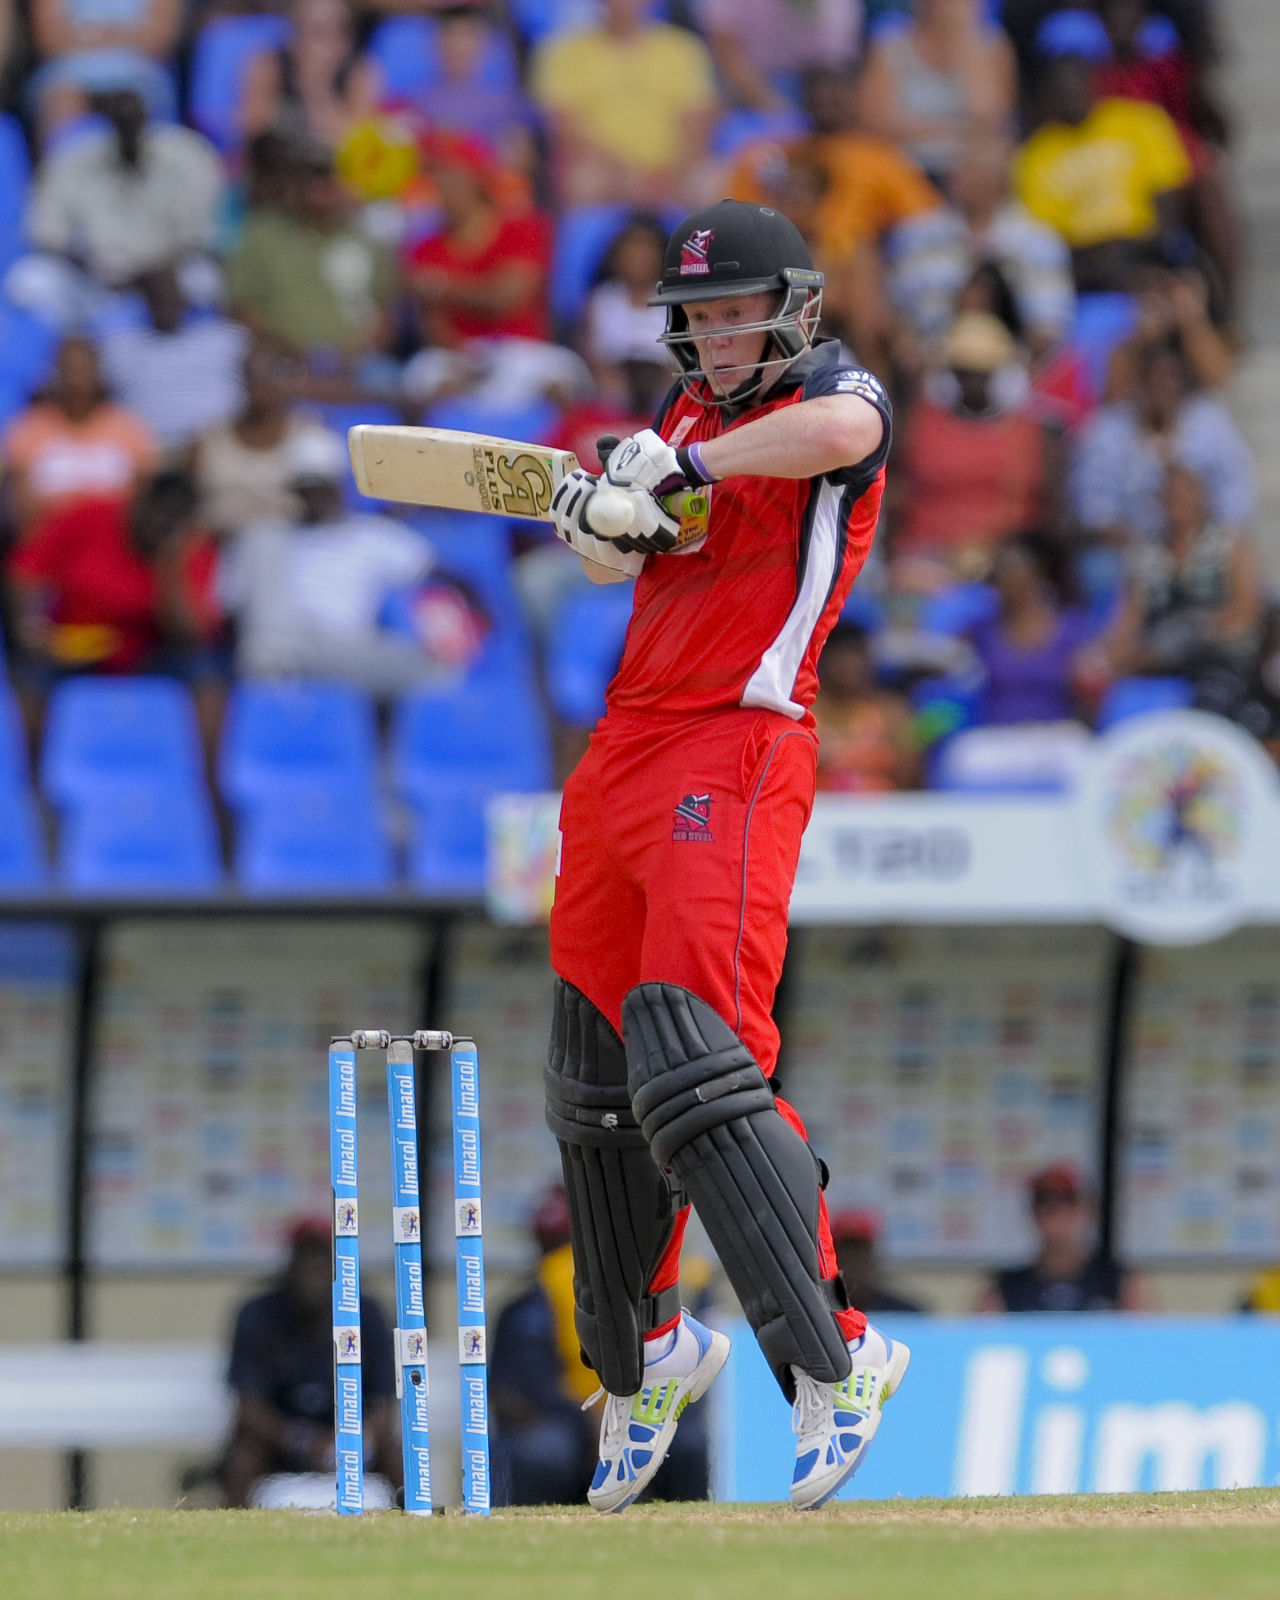 Kevin O'Brien fights off a short ball, Antigua Hawksbills v Red Steel, CPL 2014, North Sound, July 20, 2014